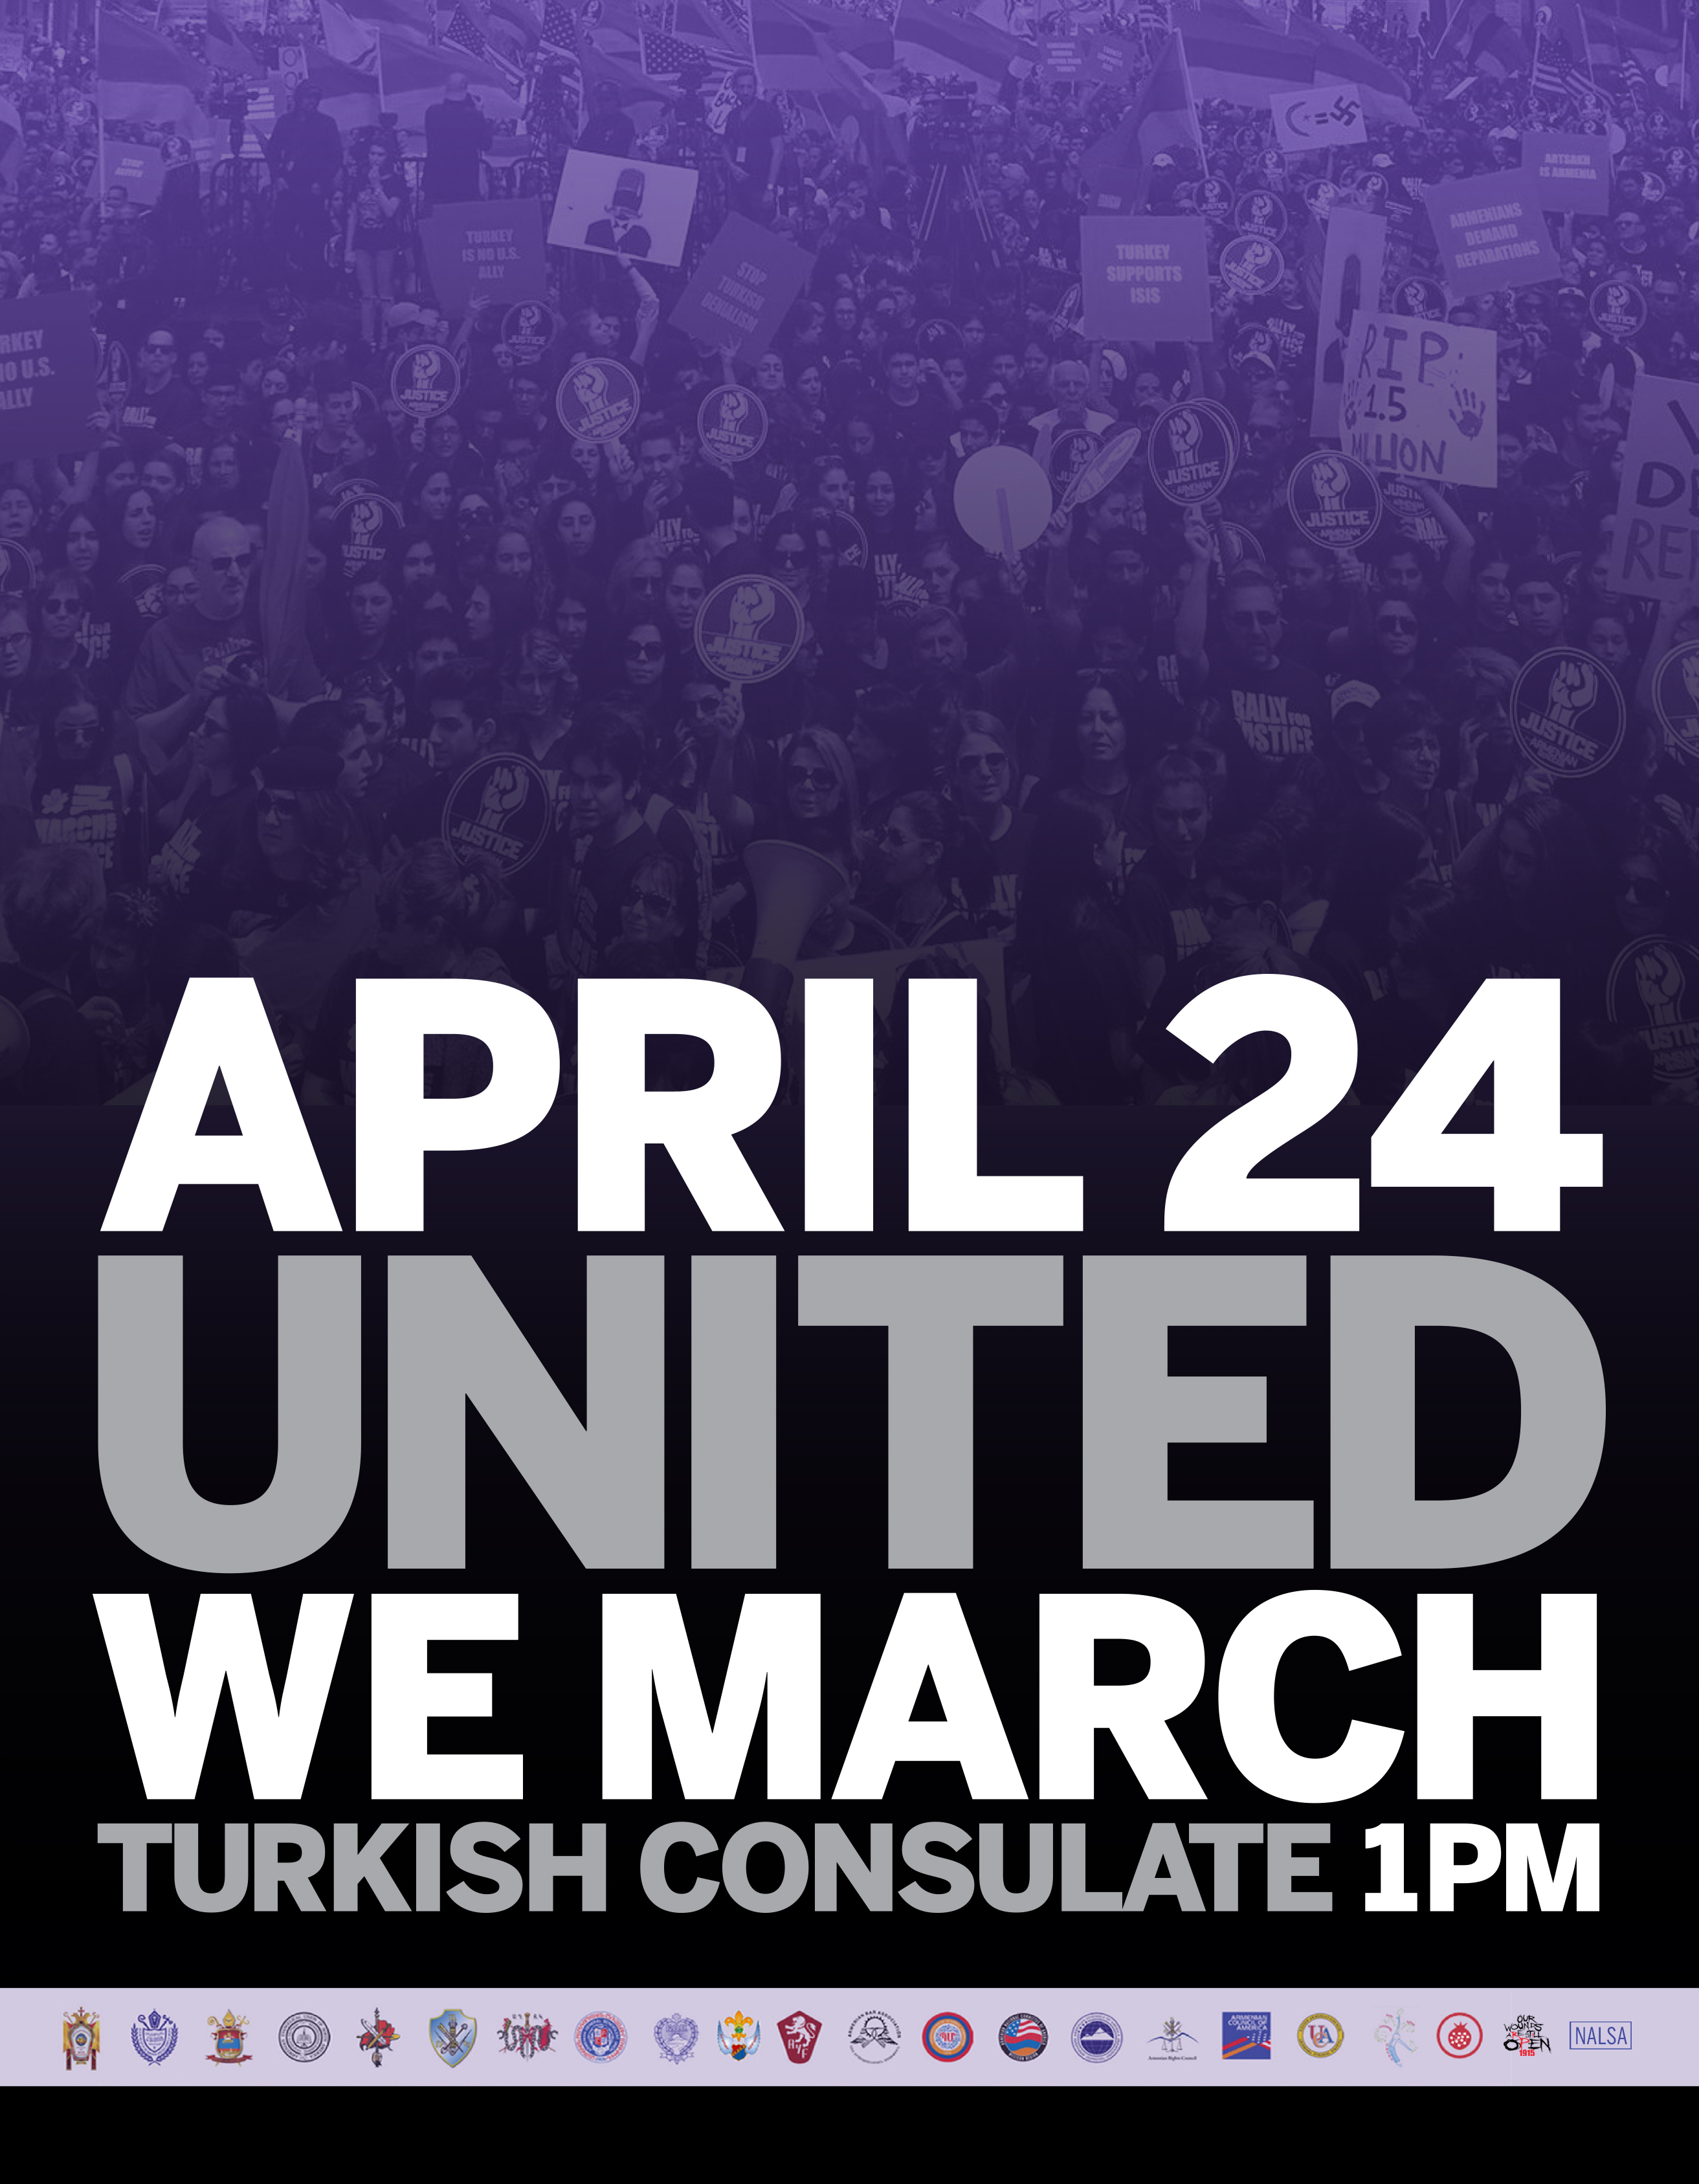 AGC announces April 24 march justice at Turkish consulate